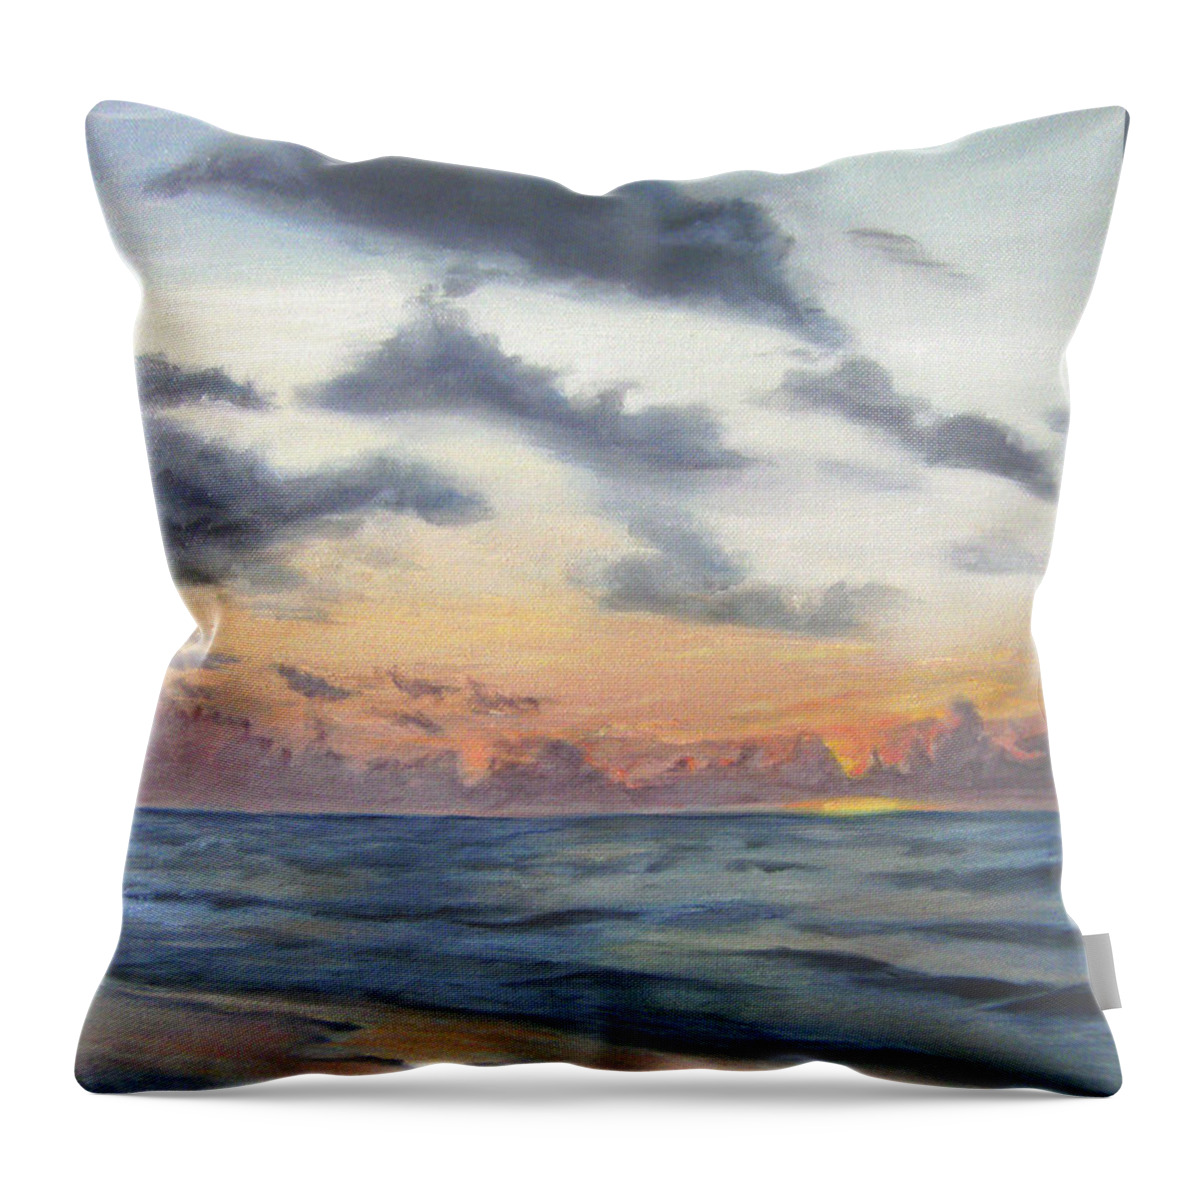 Sunrise Throw Pillow featuring the painting Sunrise 02 by Adam Johnson